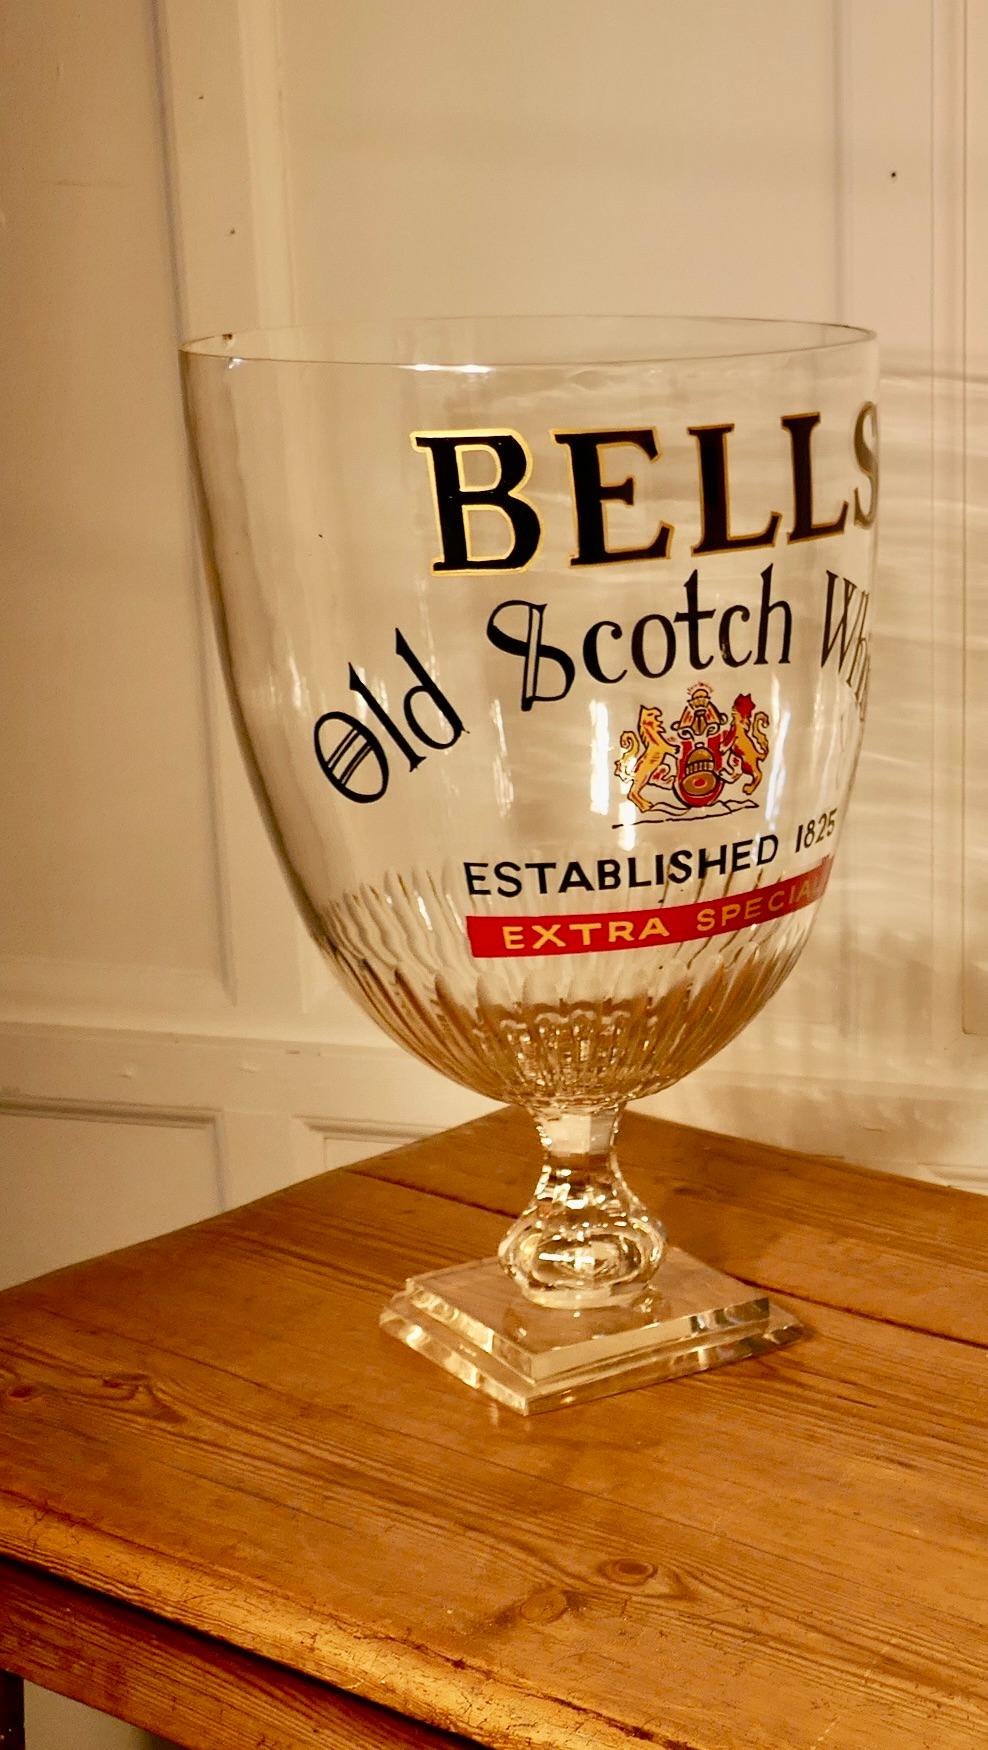 Giant Advertising Presentation Glass Chalice for Bells Scotch Whisky     For Sale 3